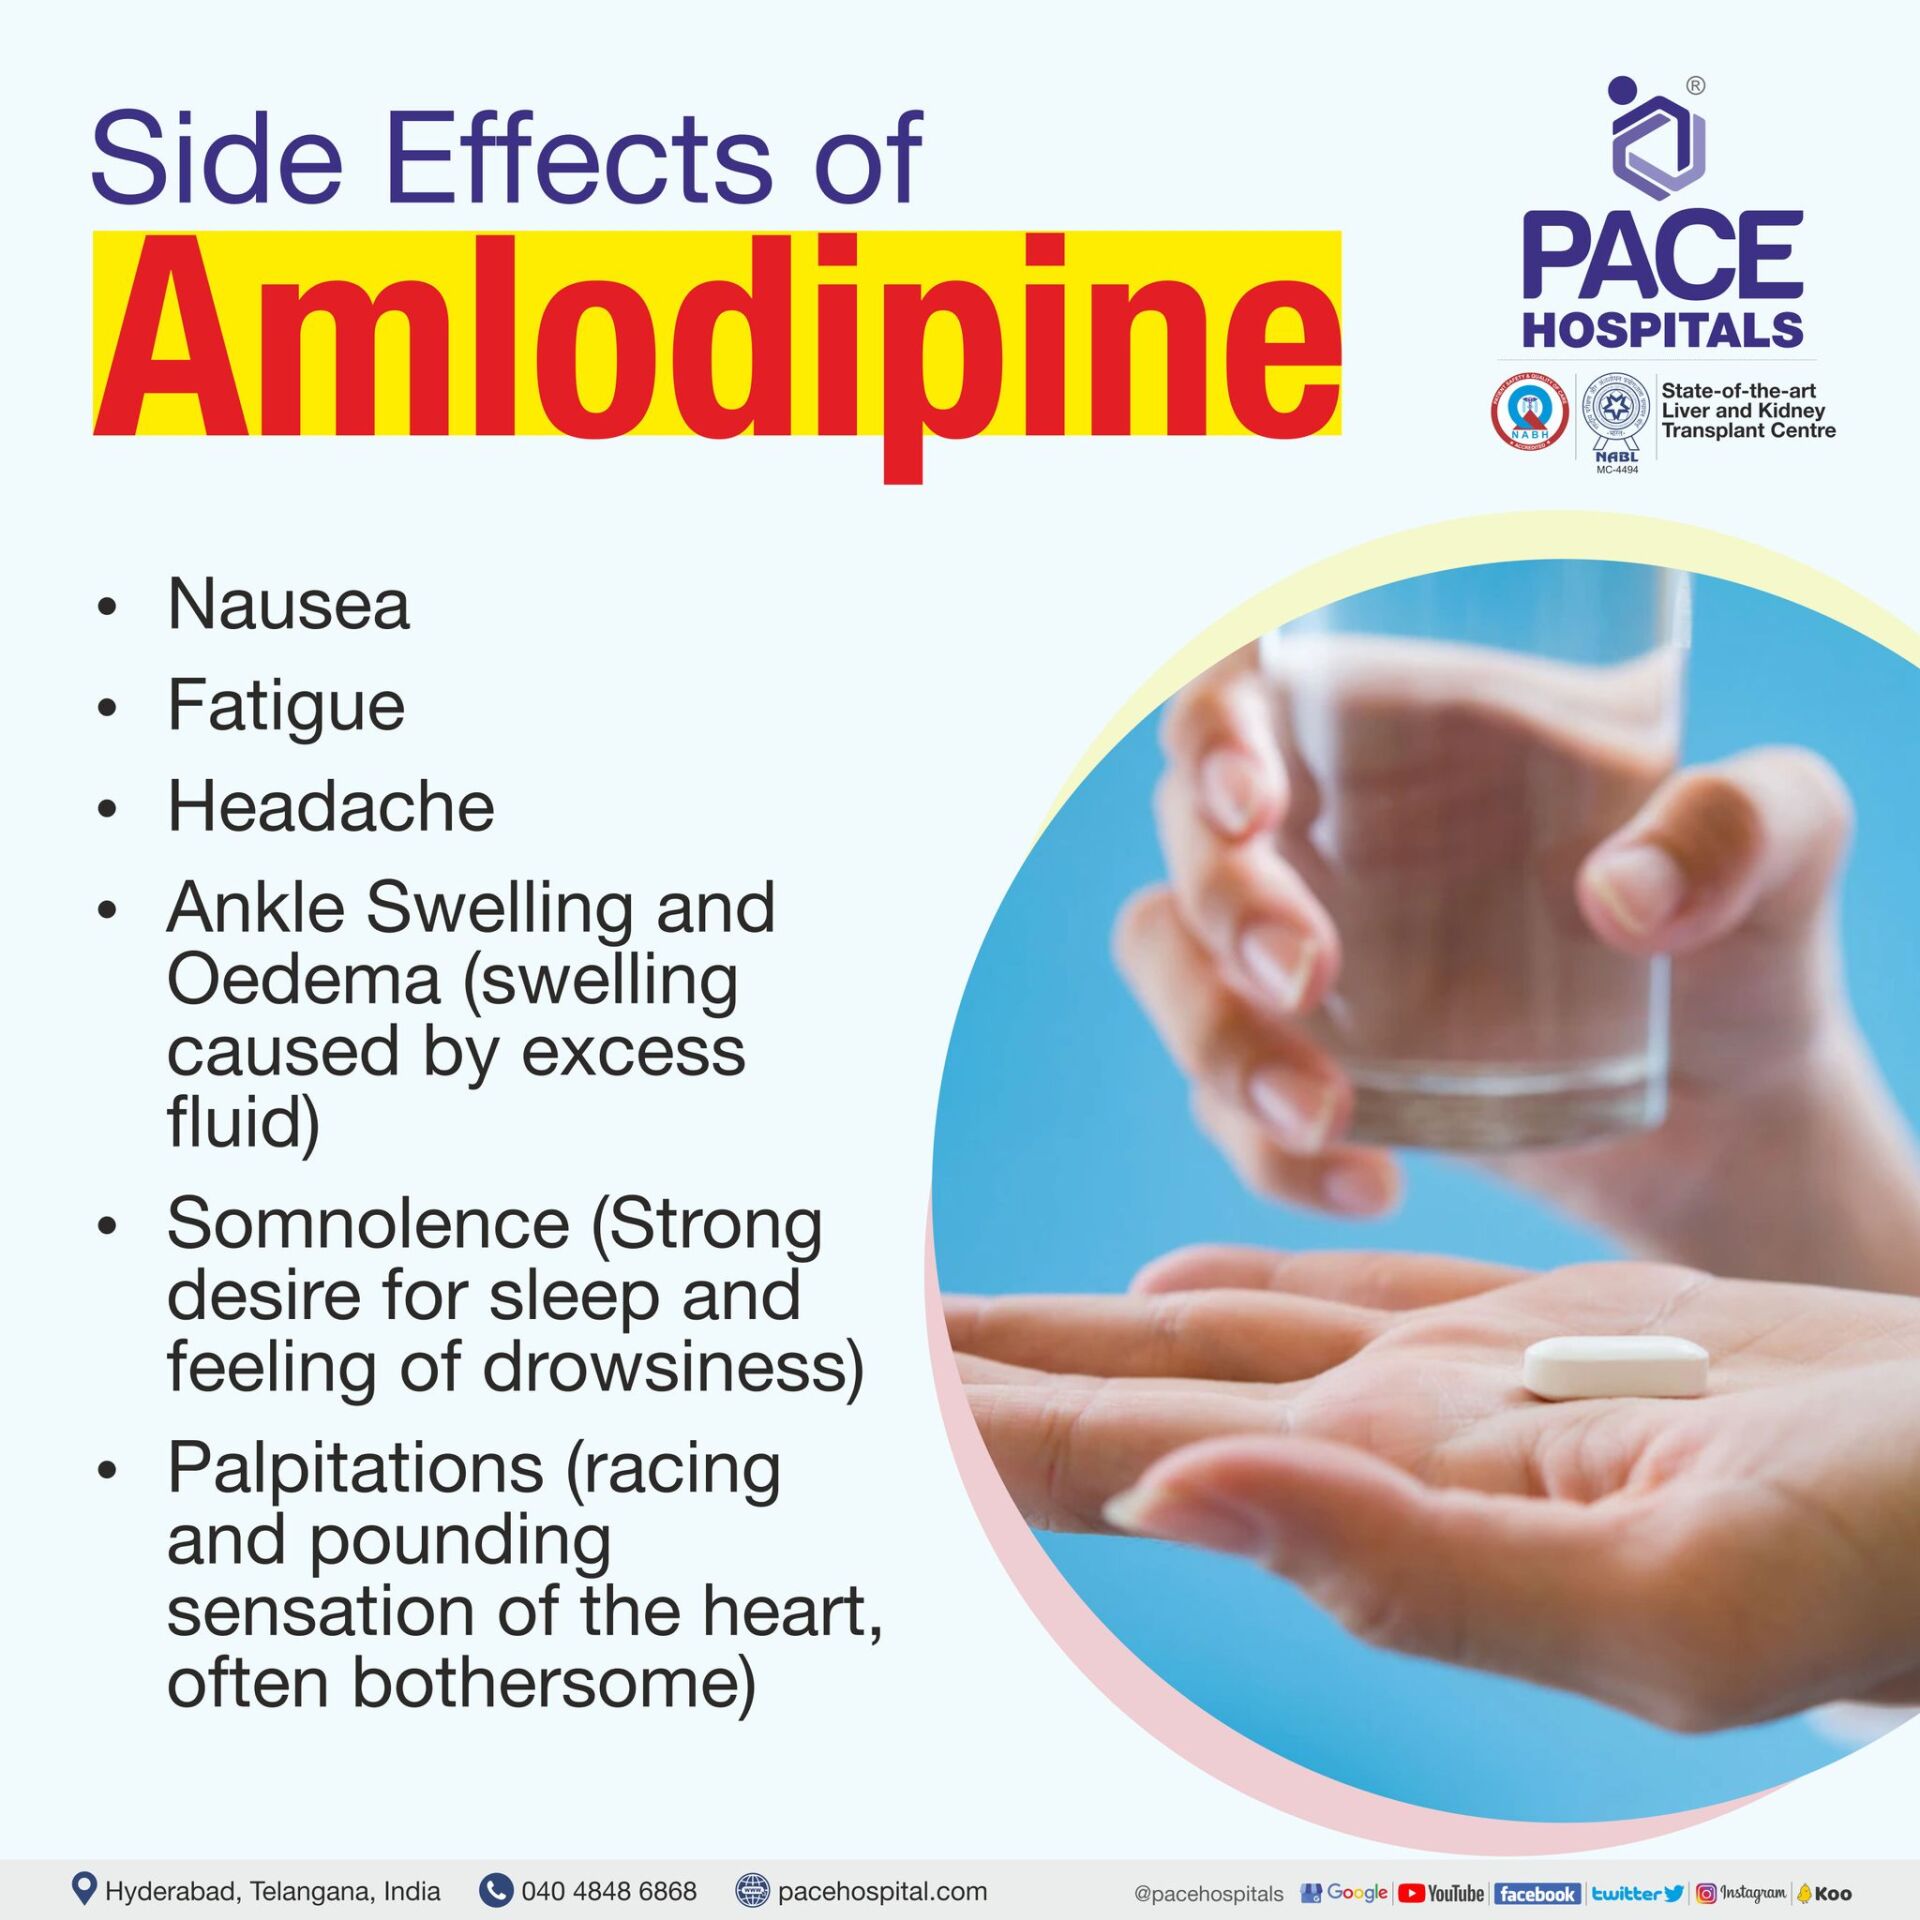 amlodipine-tablet-uses-side-effects-dosage-and-price